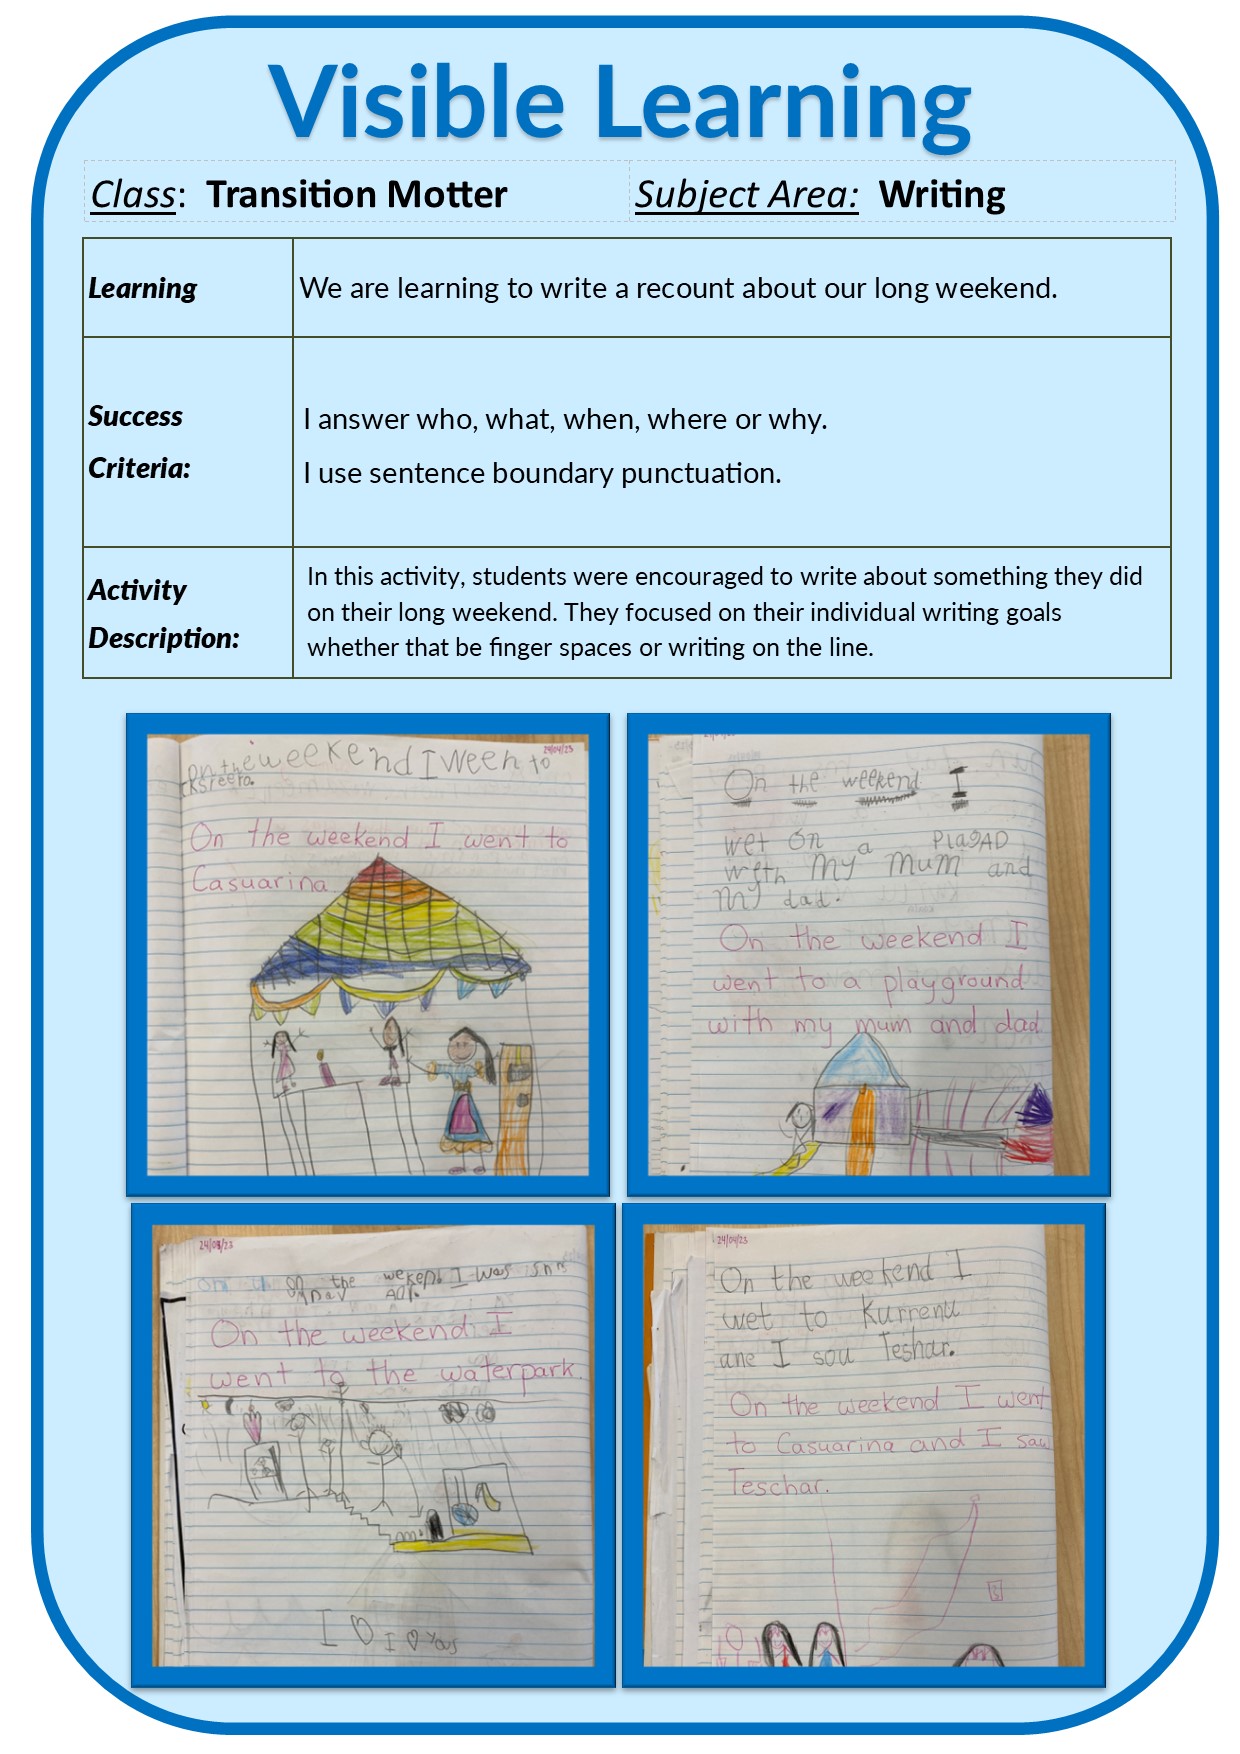 Visible Learning/T Motter - Writing Term 2 Week 1.jpg